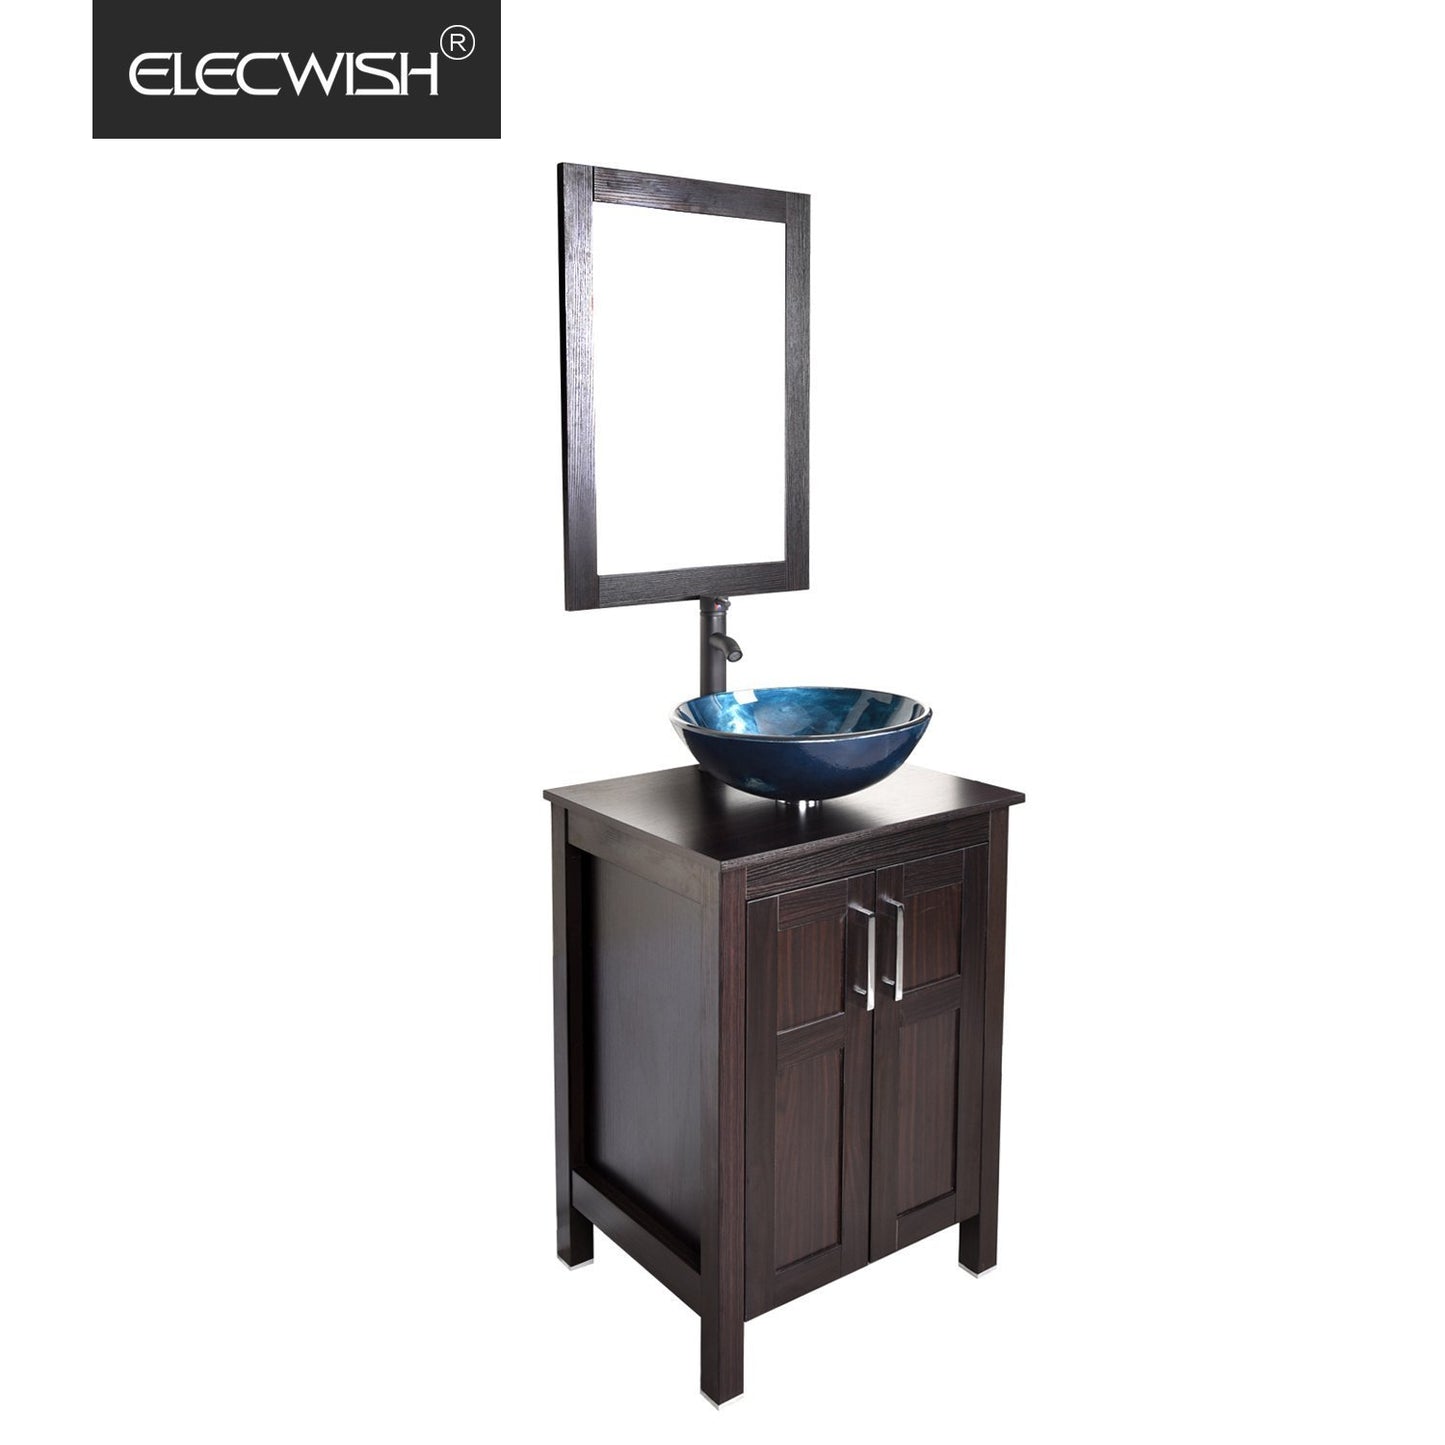 Top rated elecwish usba20090 usba20077 bathroom vanity and sink combo stand cabinet and tempered blue glass vessel sink orb faucet and pop up drain mirror mounting ring